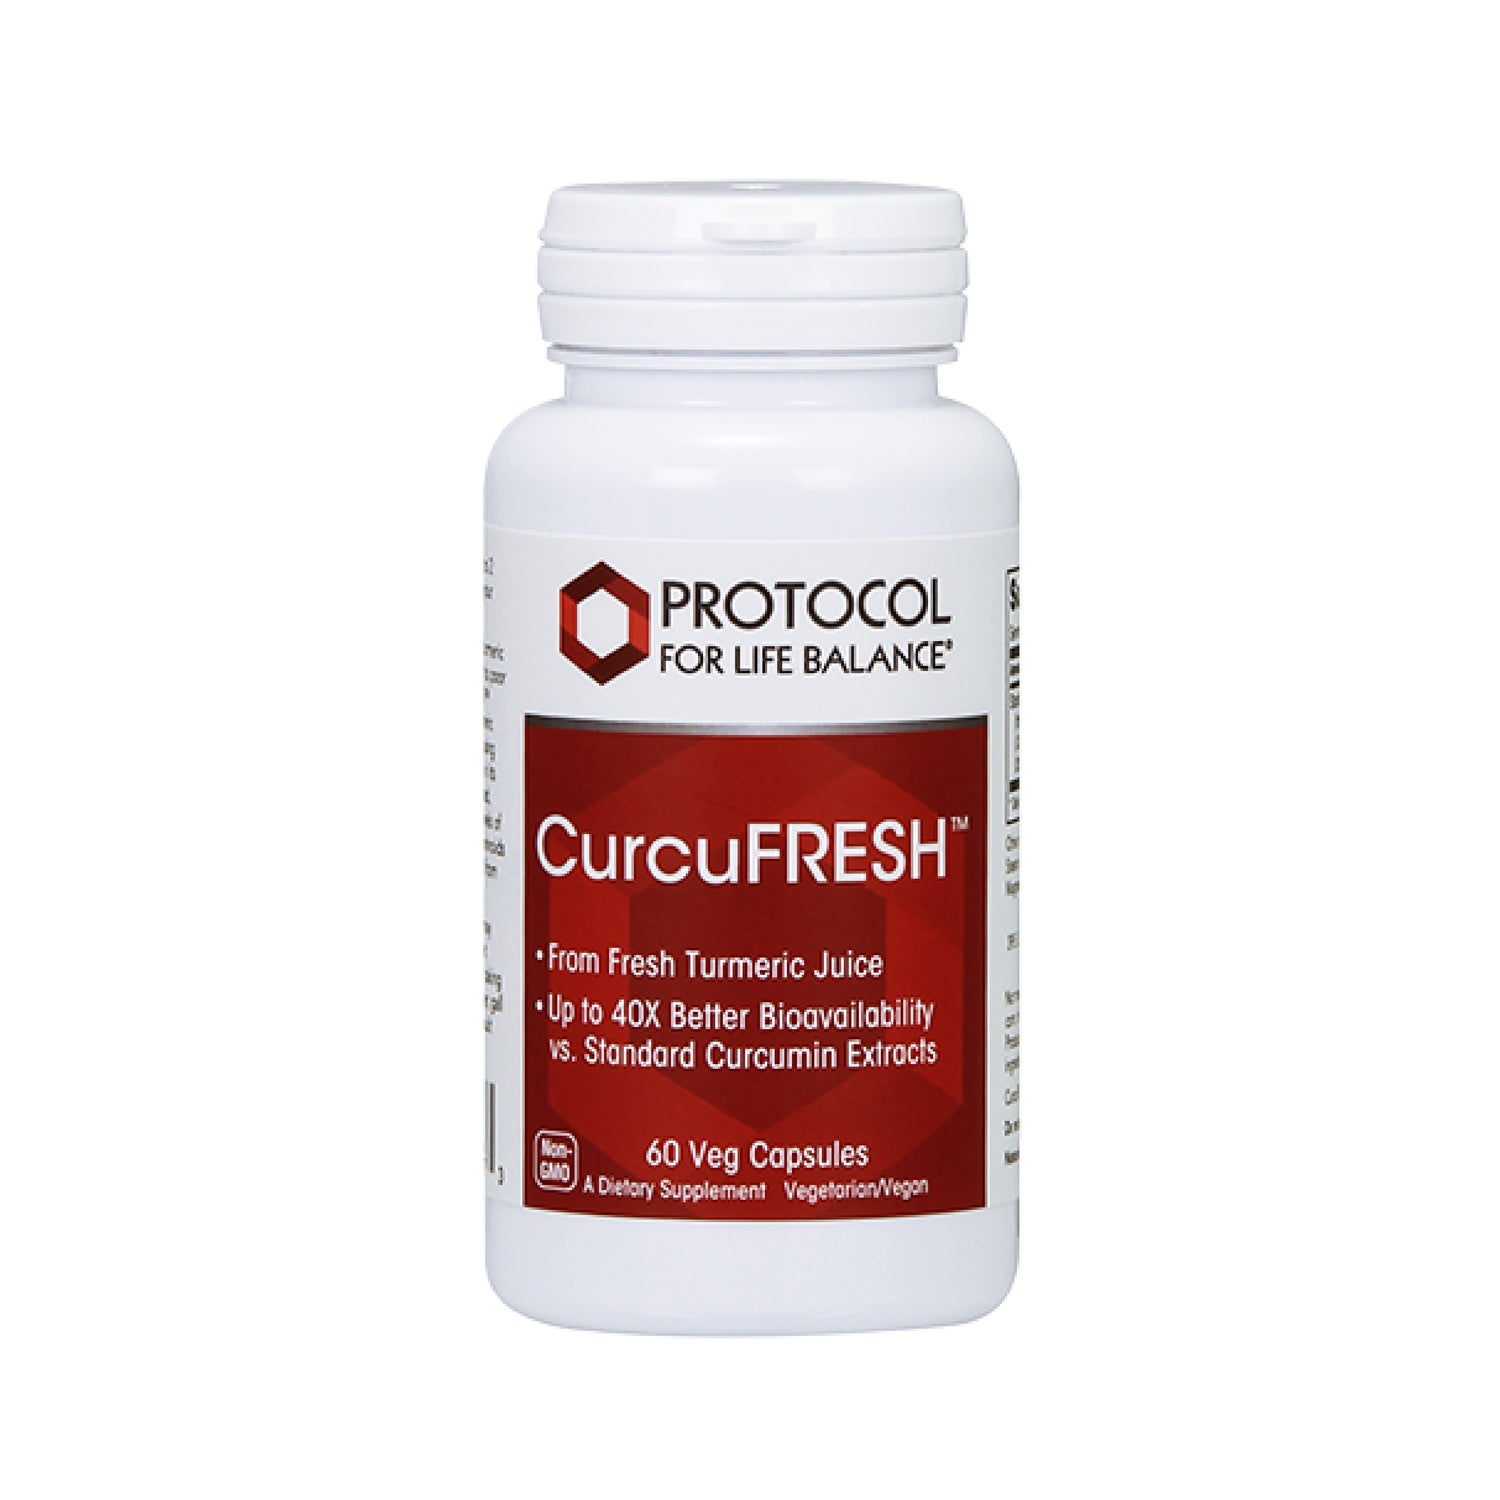 Protocol for Life Balance, CurcuFRESH, 60 Veg Capsules - Bloom Concept